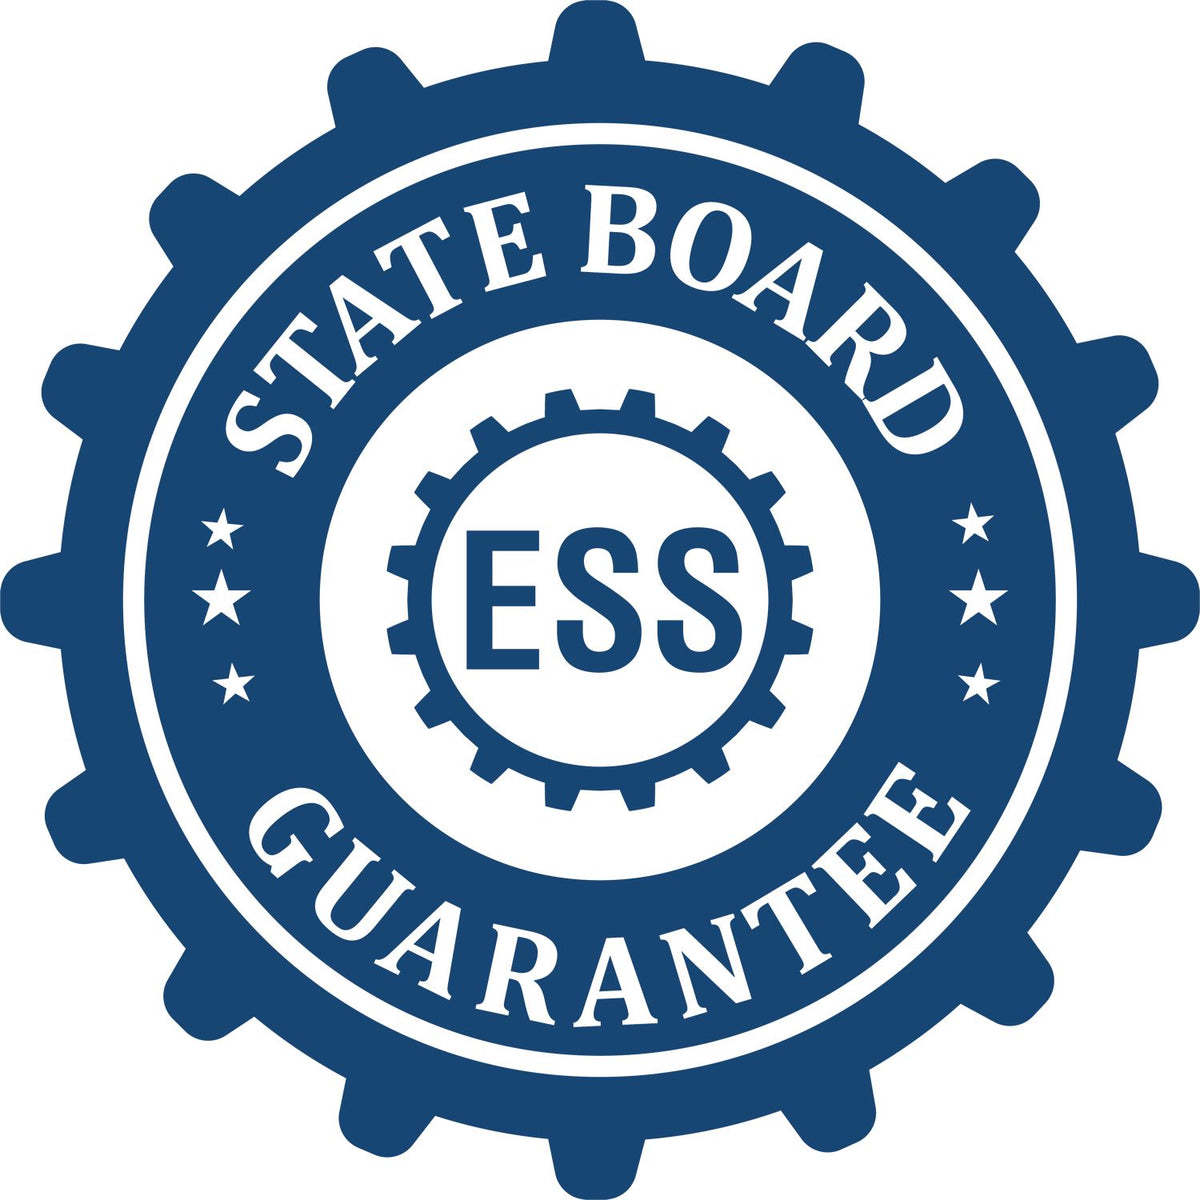 An emblem in a gear shape illustrating a state board guarantee for the Digital Montana Geologist Stamp, Electronic Seal for Montana Geologist